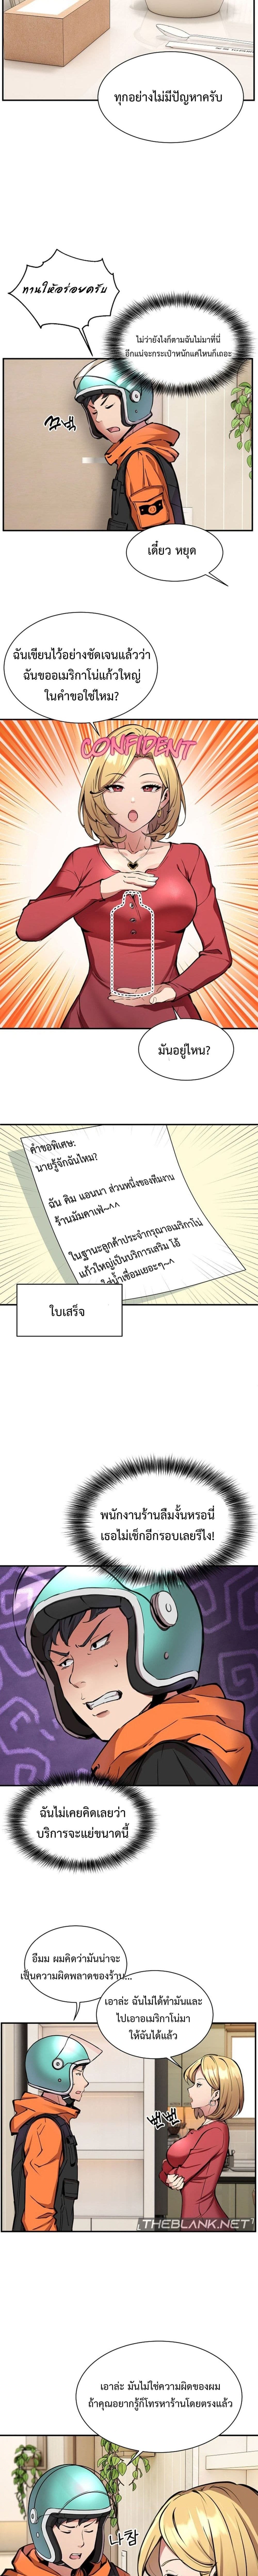 Driver in the New City ตอนที่ 1 ภาพ 18